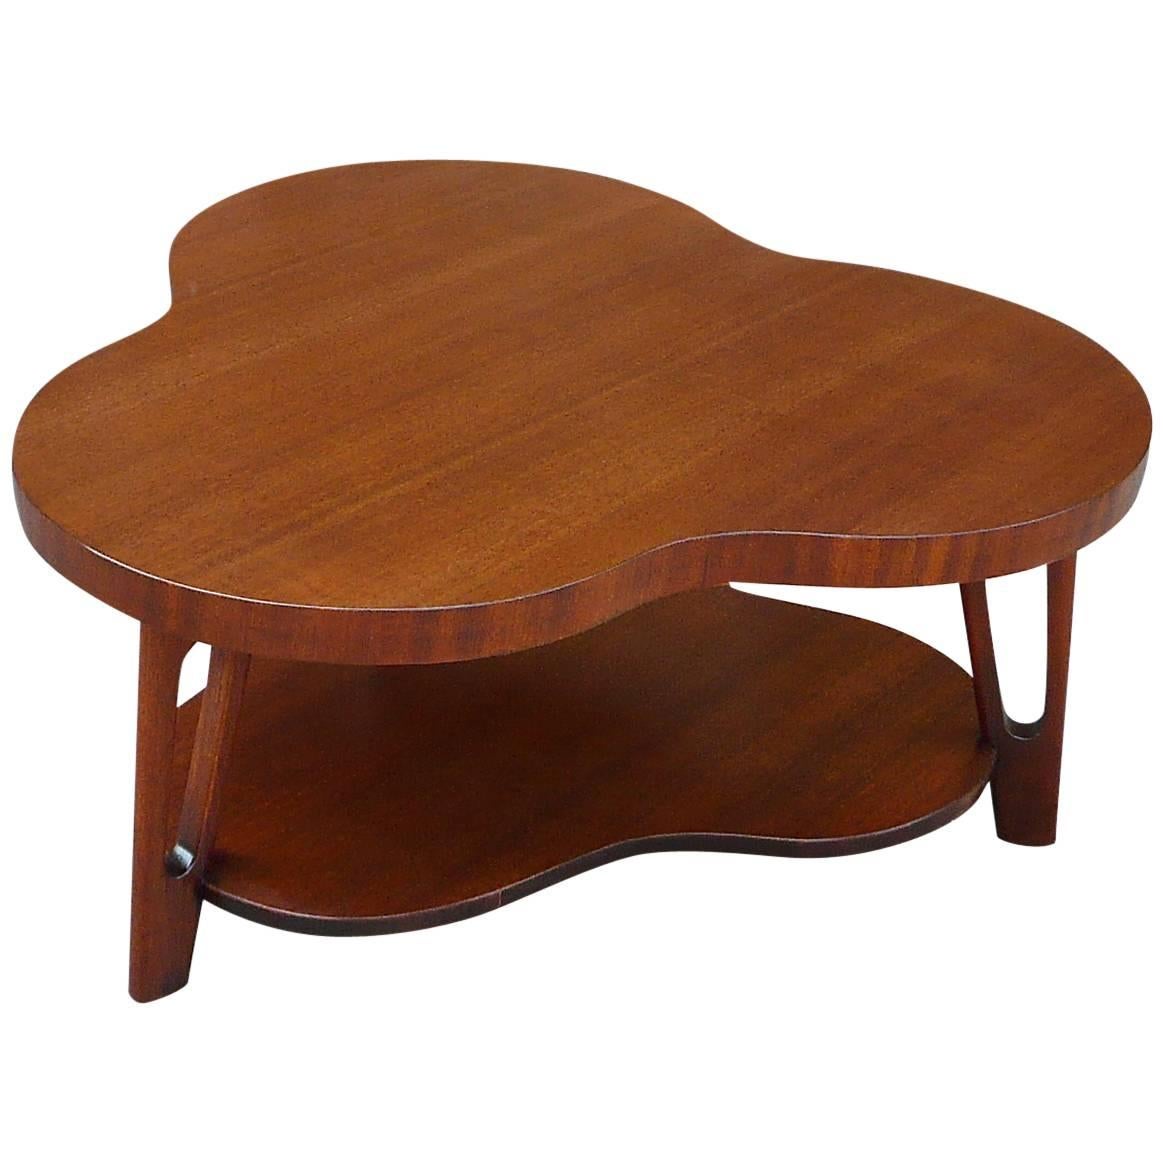 Mid-Century Mahogany Clover Shape Coffee Table Attributed To Glibert Rohde